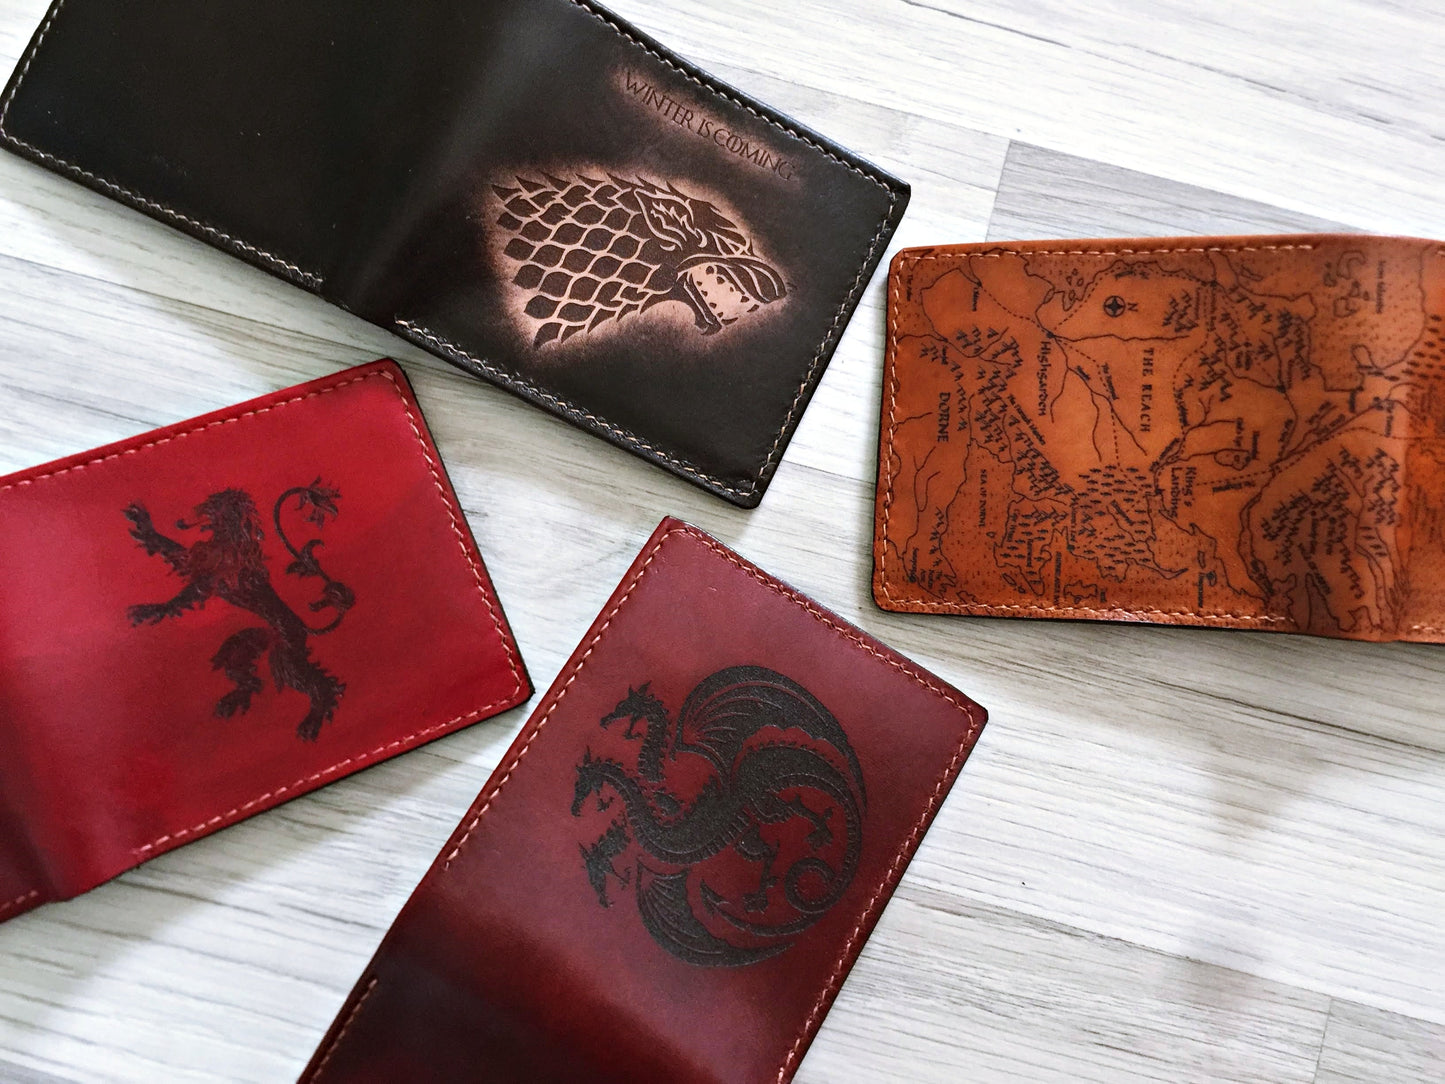 Mayan Corner - Game of Thrones leather men's wallet, men's gift ideas, personalized gift for him, anniversary present - House Lannister Logo